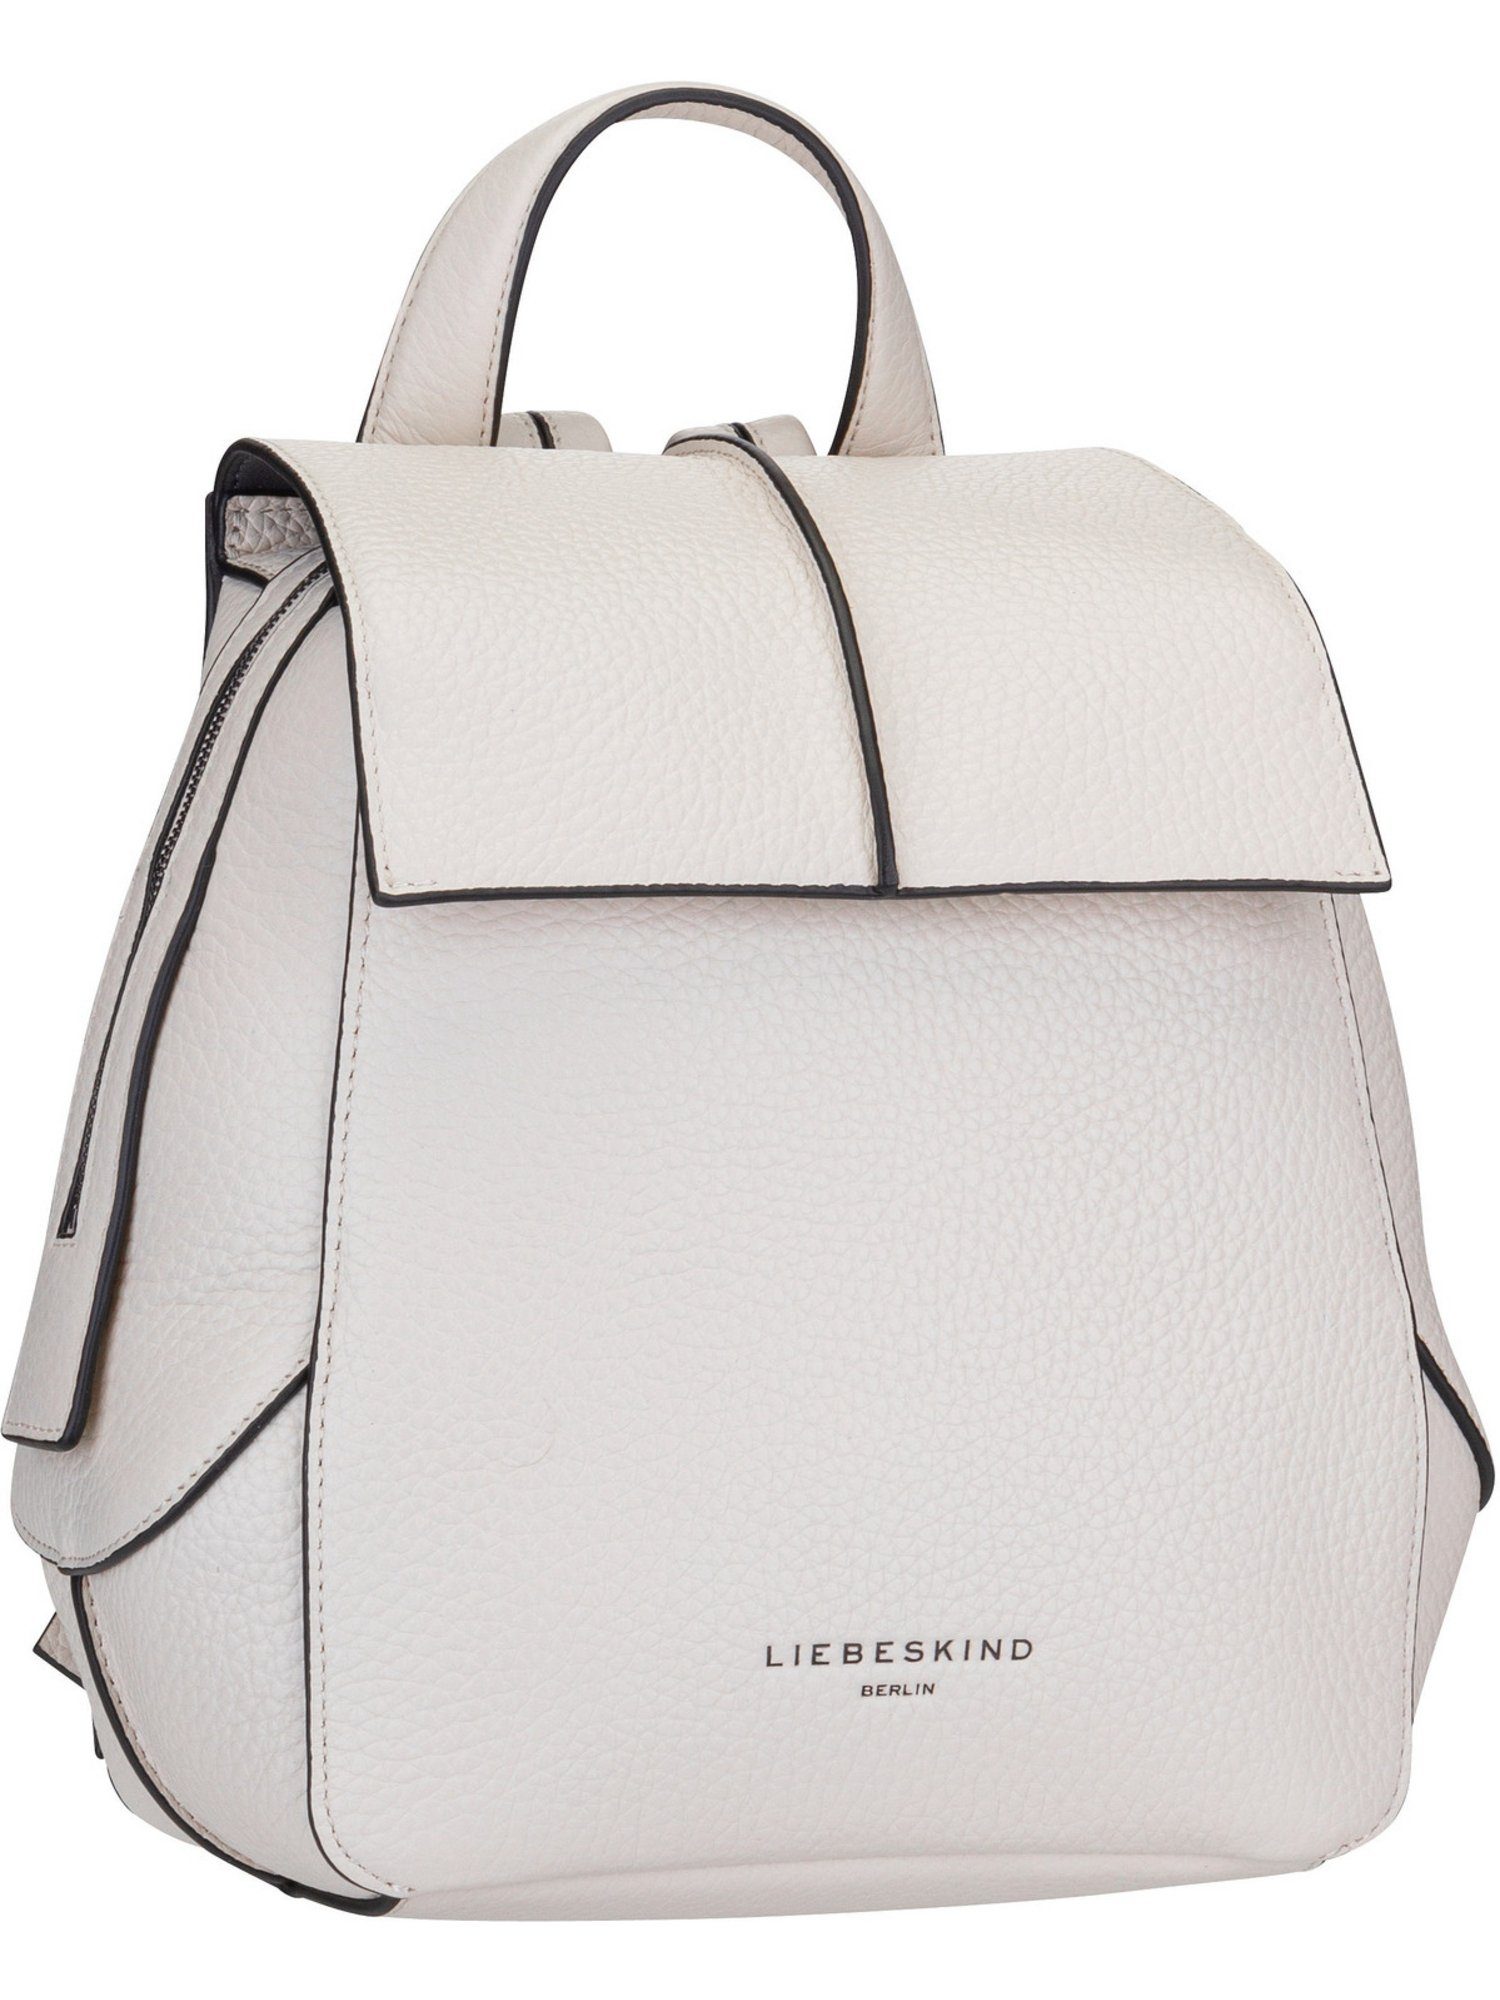 Liebeskind Berlin Rucksack Lilly 2 Pebble Backpack S Coconut